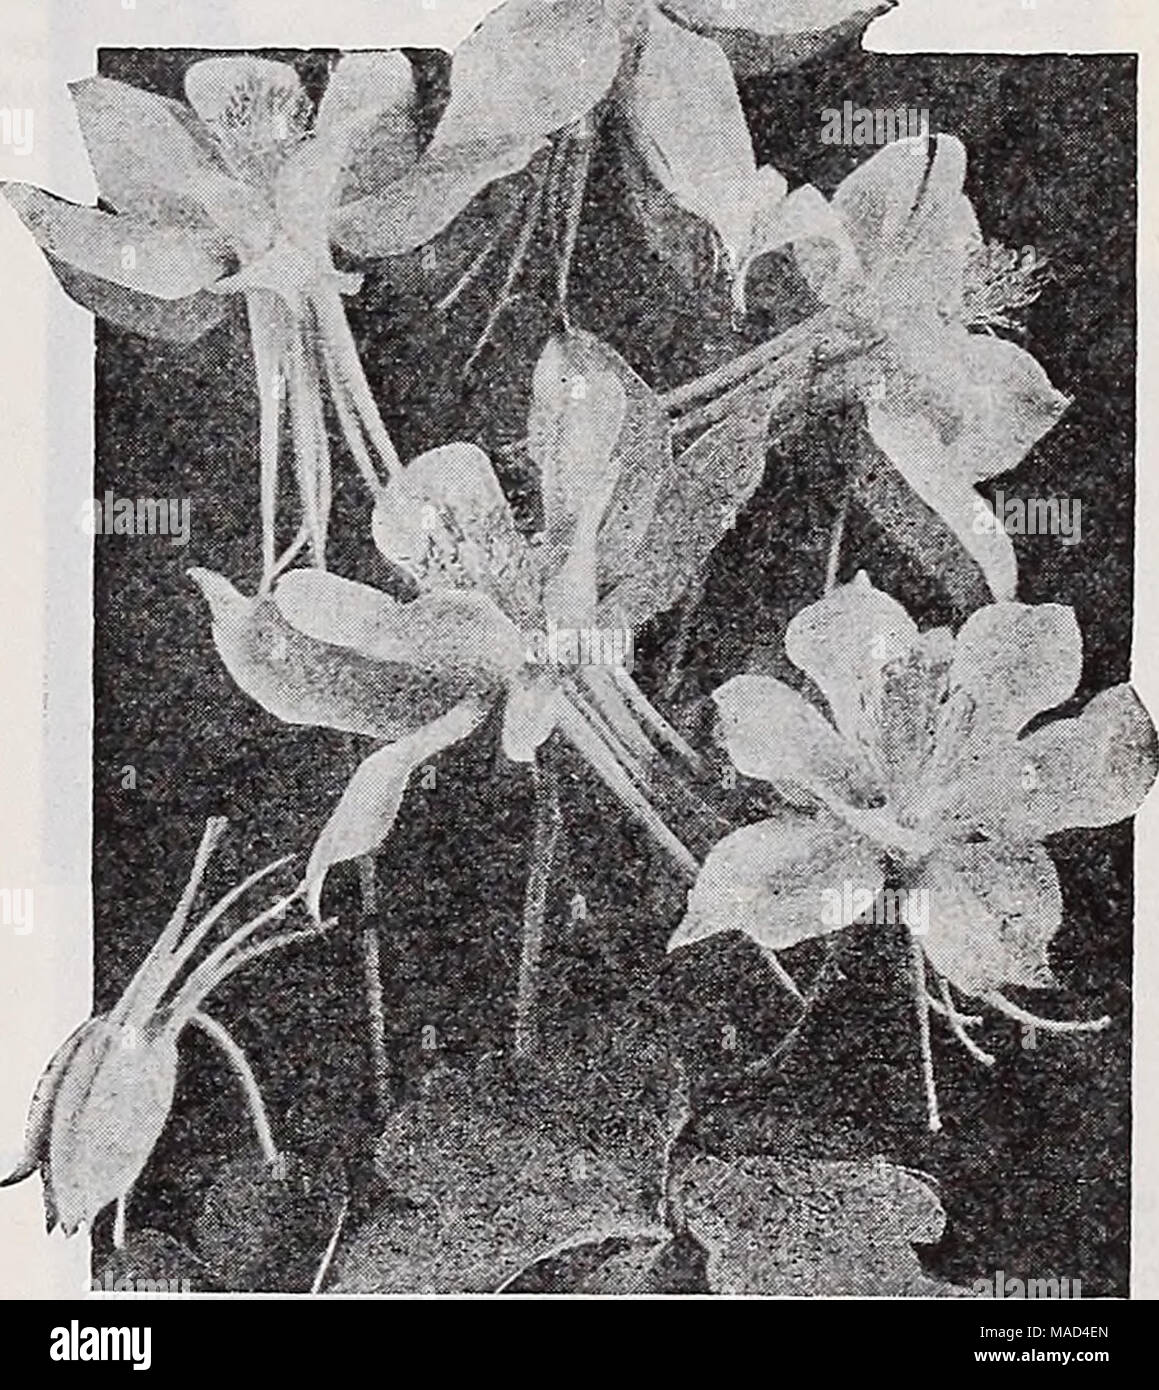 . Dreer's wholesale catalog for florists and market gardeners : 1940 winter spring summer . Dreer's Long-Spurred Aquilegia or Columbine Aquilegia—Columbine Per doz. Far 100 Crimson Star. Brilliant blood crimson with conspicuous white corolla $2 SO $15 00 Dreer'a lions' Spurred Hybrids 1 50 10 00 — Iionsr Spurred Pinfc 1 50 10 00 Arabis—Rock Cress Alpina. Single white; 3-inch pots 1 50 10 00 — fl. pi. 3-lnch pots a 50 15 00 Arenaria—Sandwort Montana. 3-inch pots 1 50 10 00 Customer pays transportation cbargres on plants. 69 Stock Photo